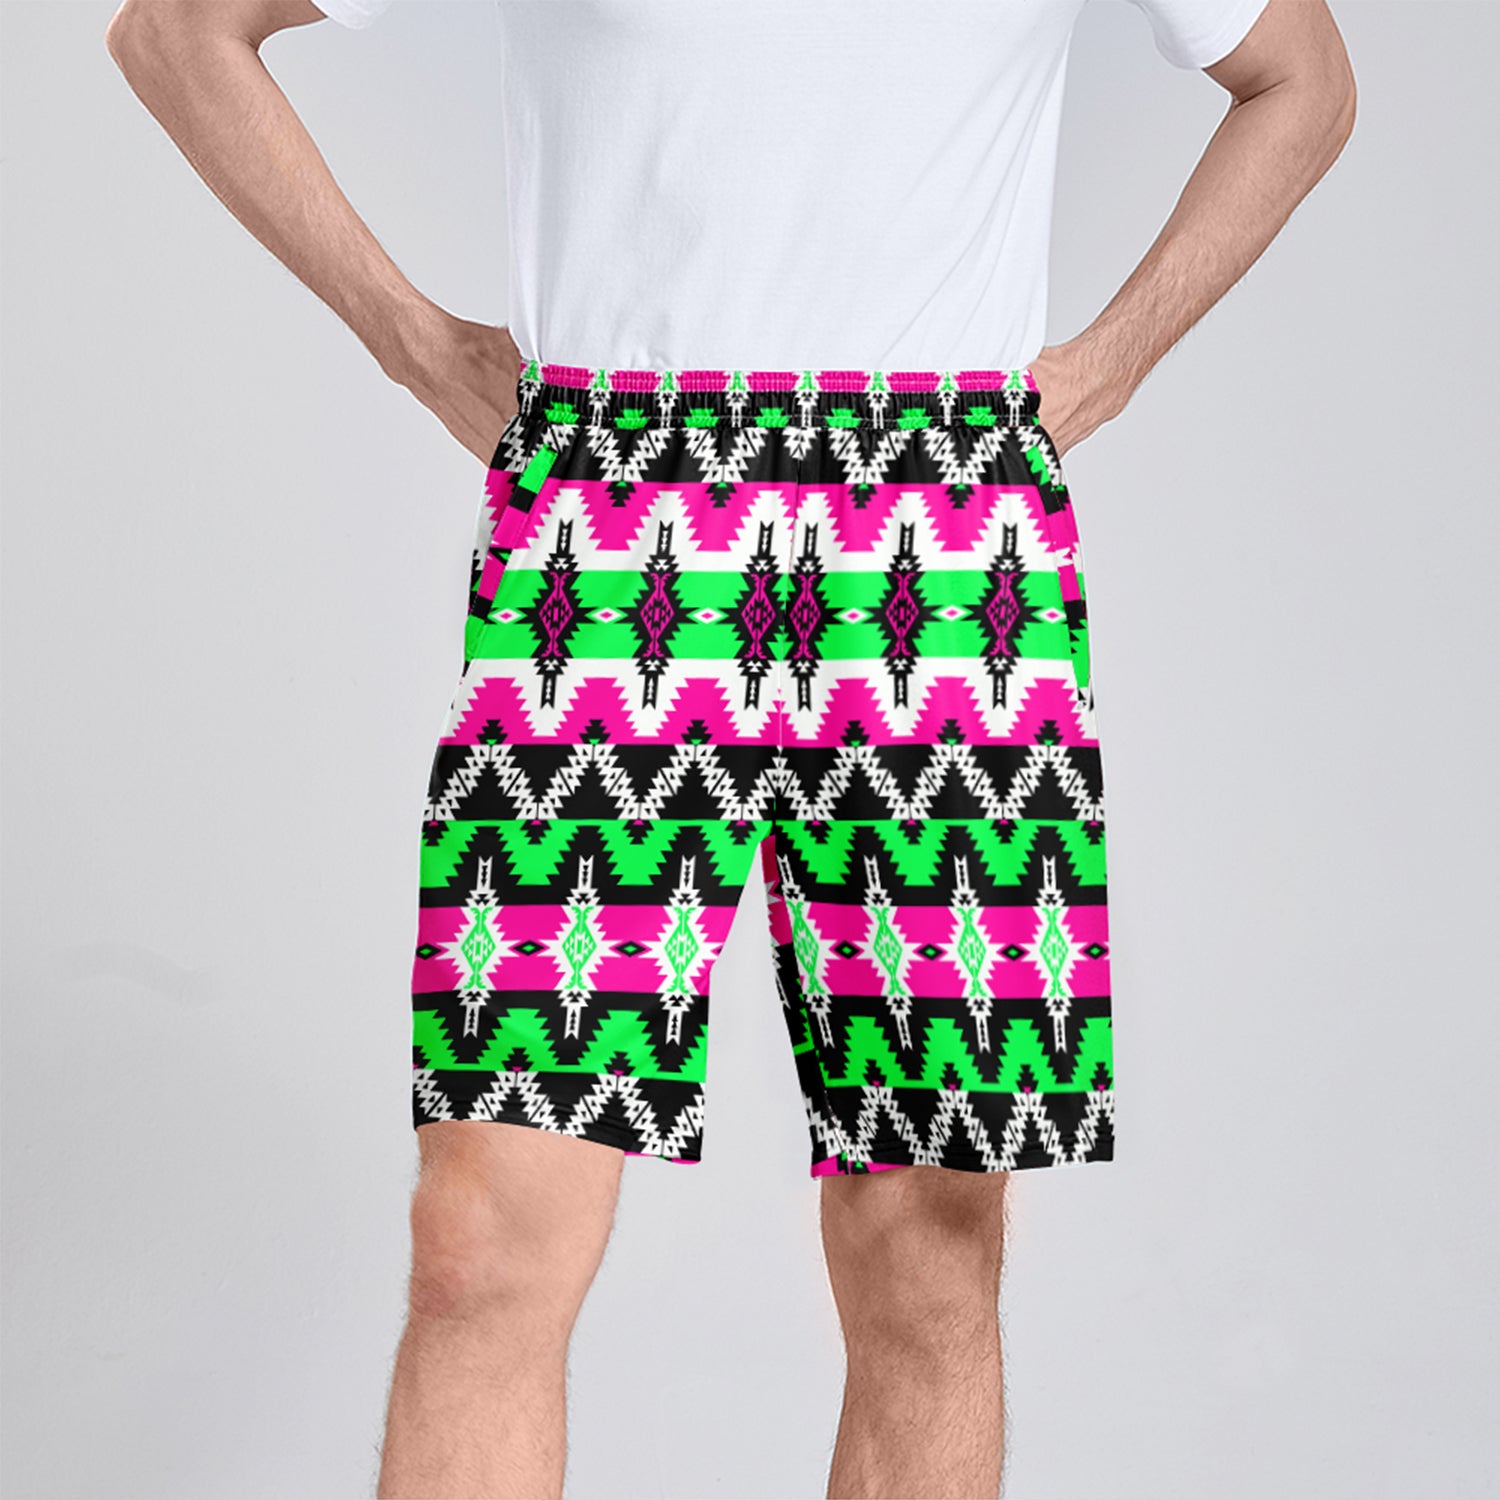 Two Spirit Ceremony Athletic Shorts with Pockets